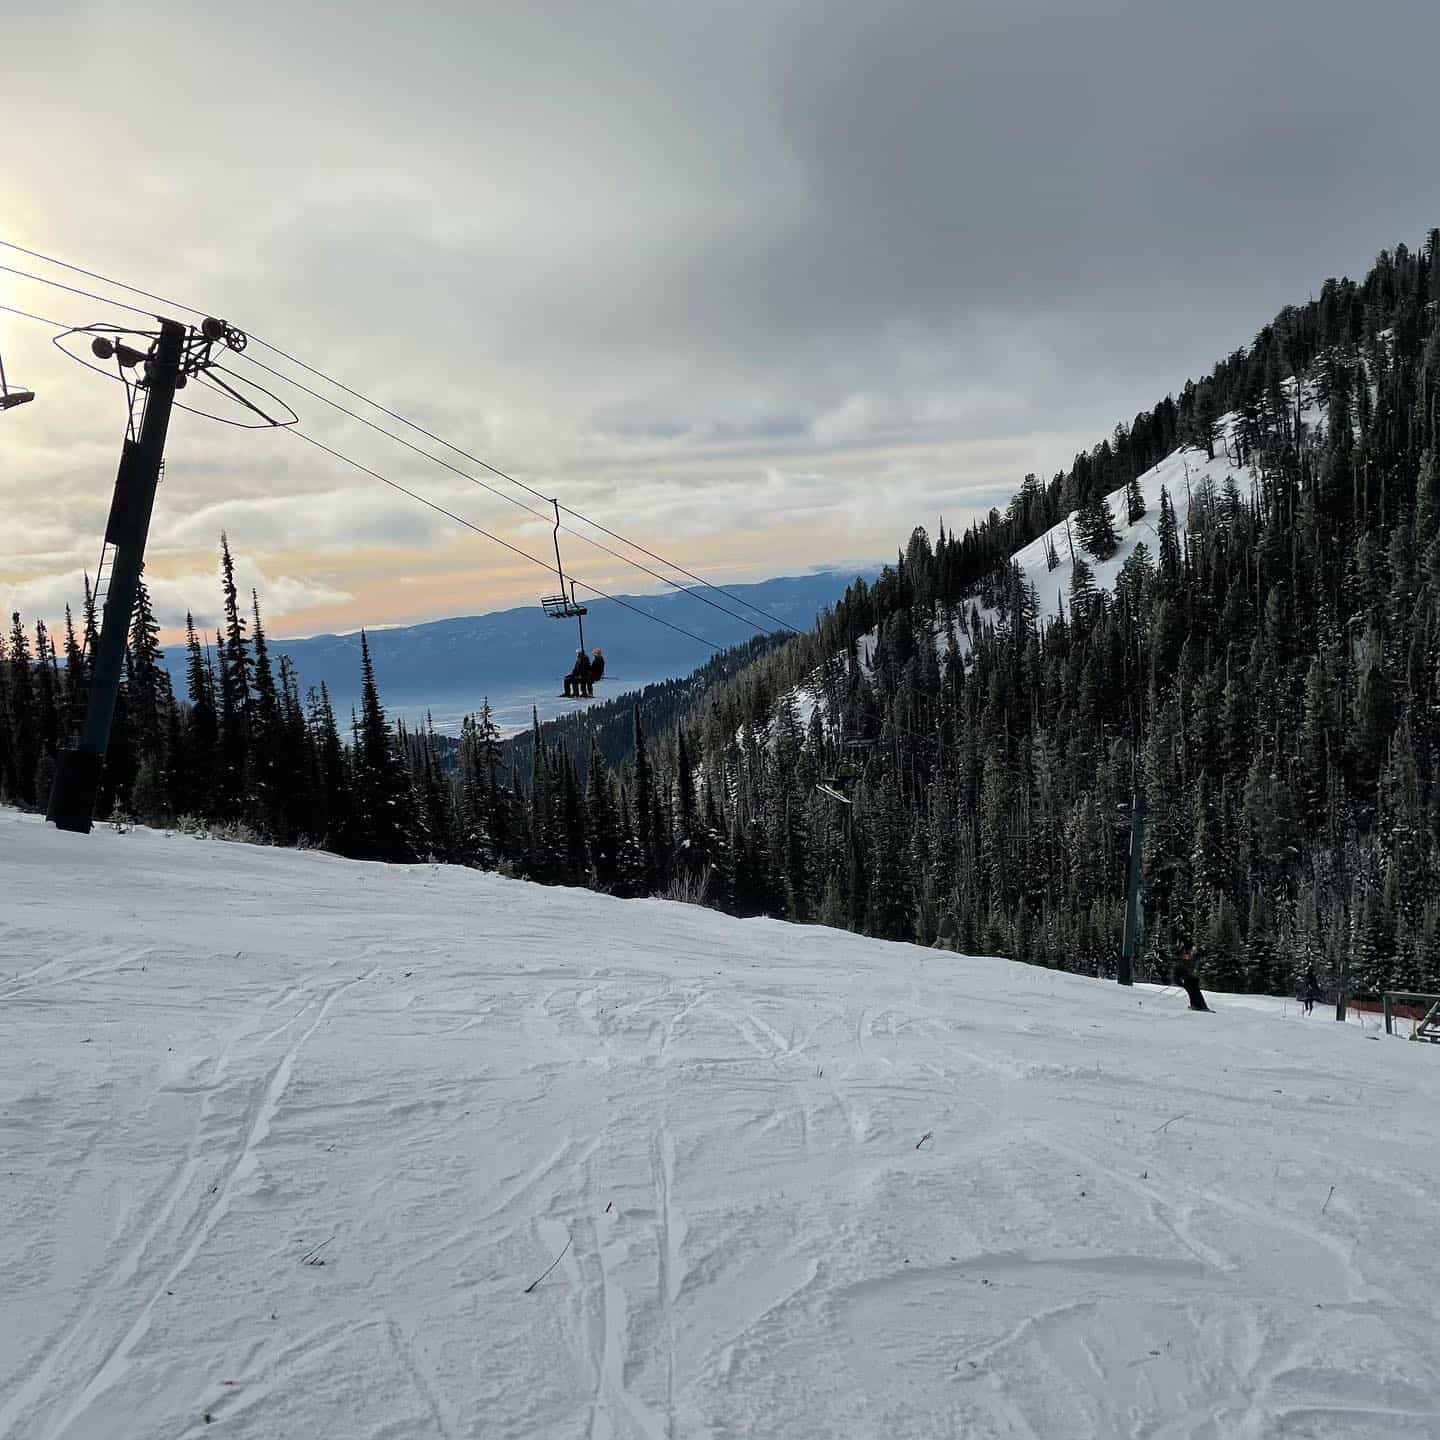 Montana Snowbowl, steepest chairlift, 